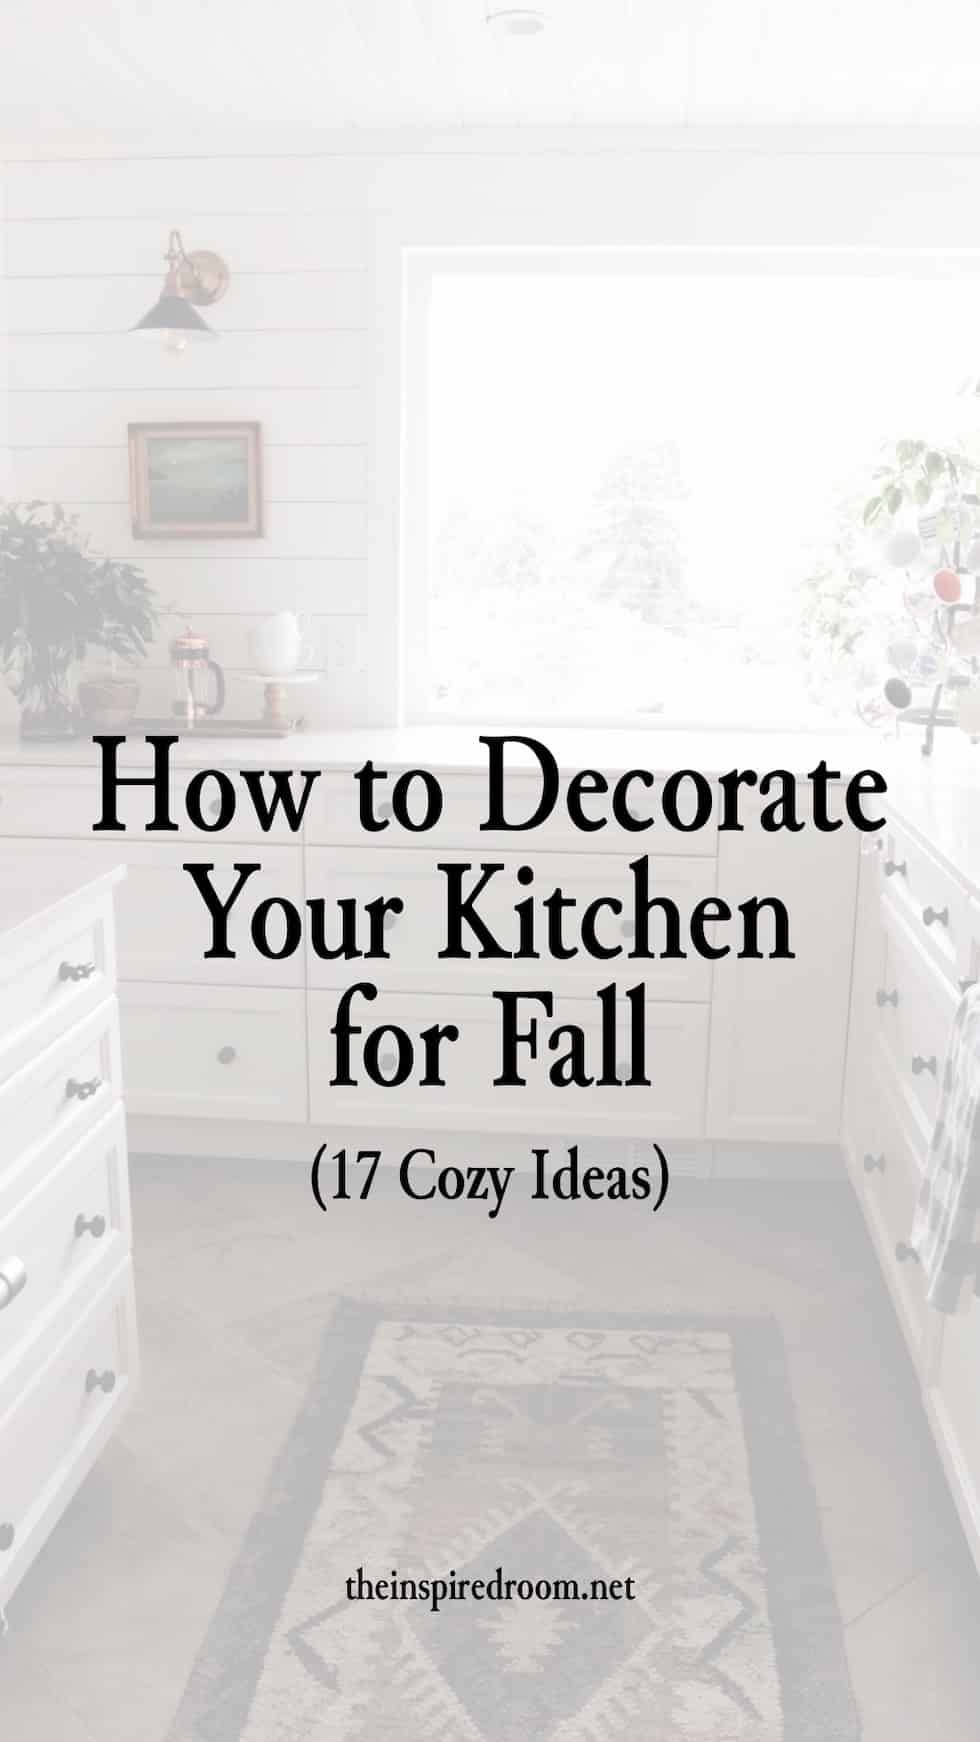 How to Decorate Your Kitchen for Fall (17 Convenient Ideas!)